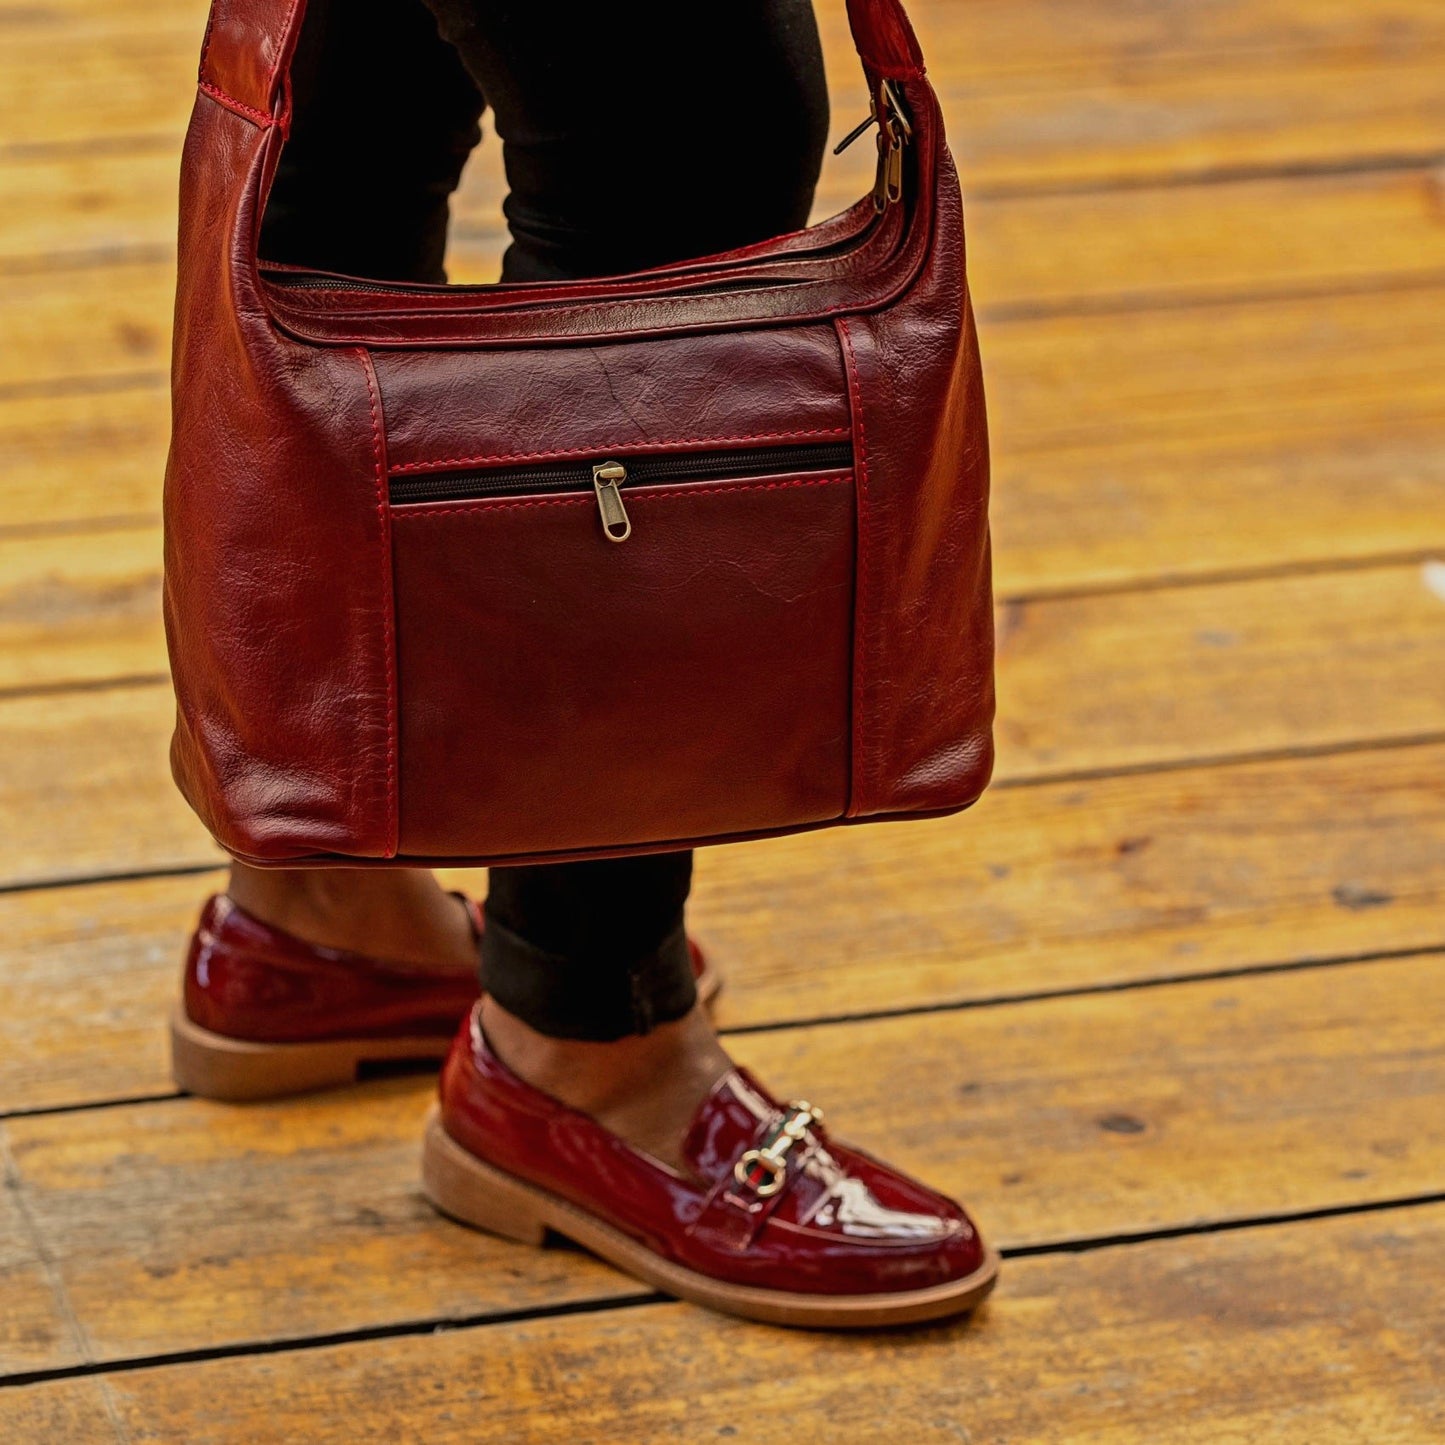 Gb7 leather bags in cherry red made by cape Masai Leather